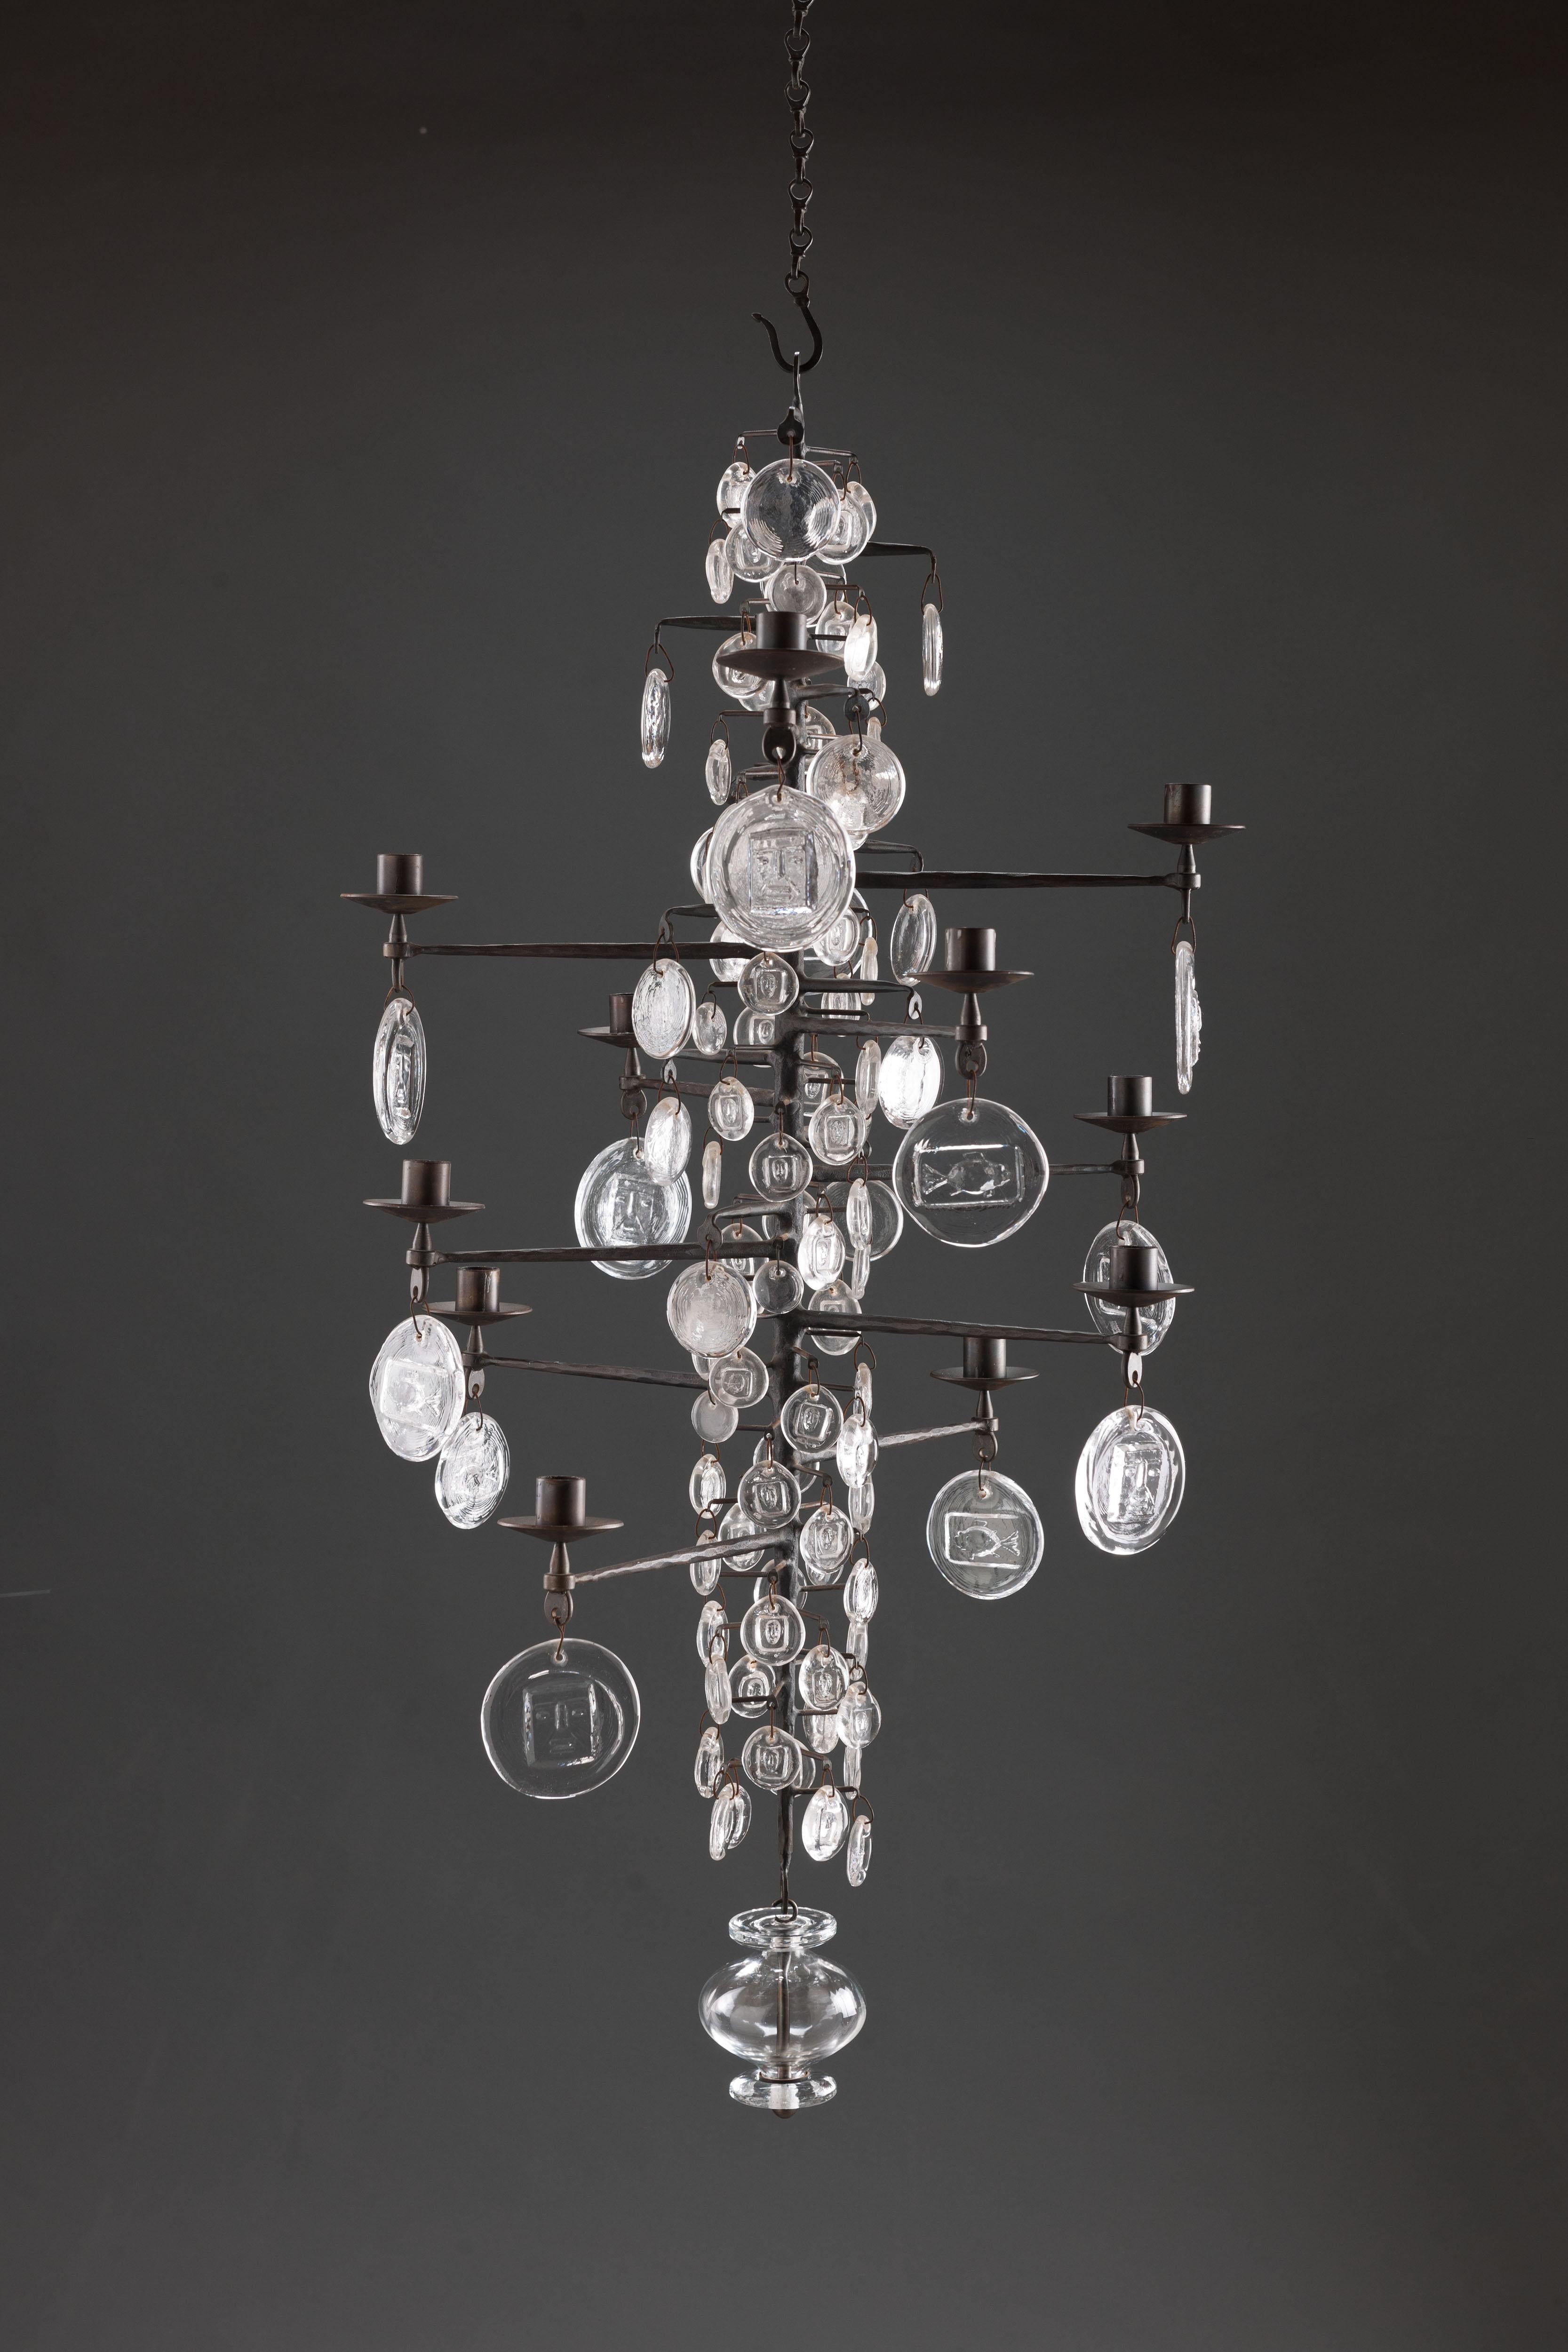 Cast iron, mouth blown and pressed glass 12-arm chandelier for 12 candles by Swedish designer Erik Hoglund with images of animals and faces. 
Boda glassworks, Axel Stromberg ironworks, Sweden, 1957. 

Early edition on welded chain. Rarely offered